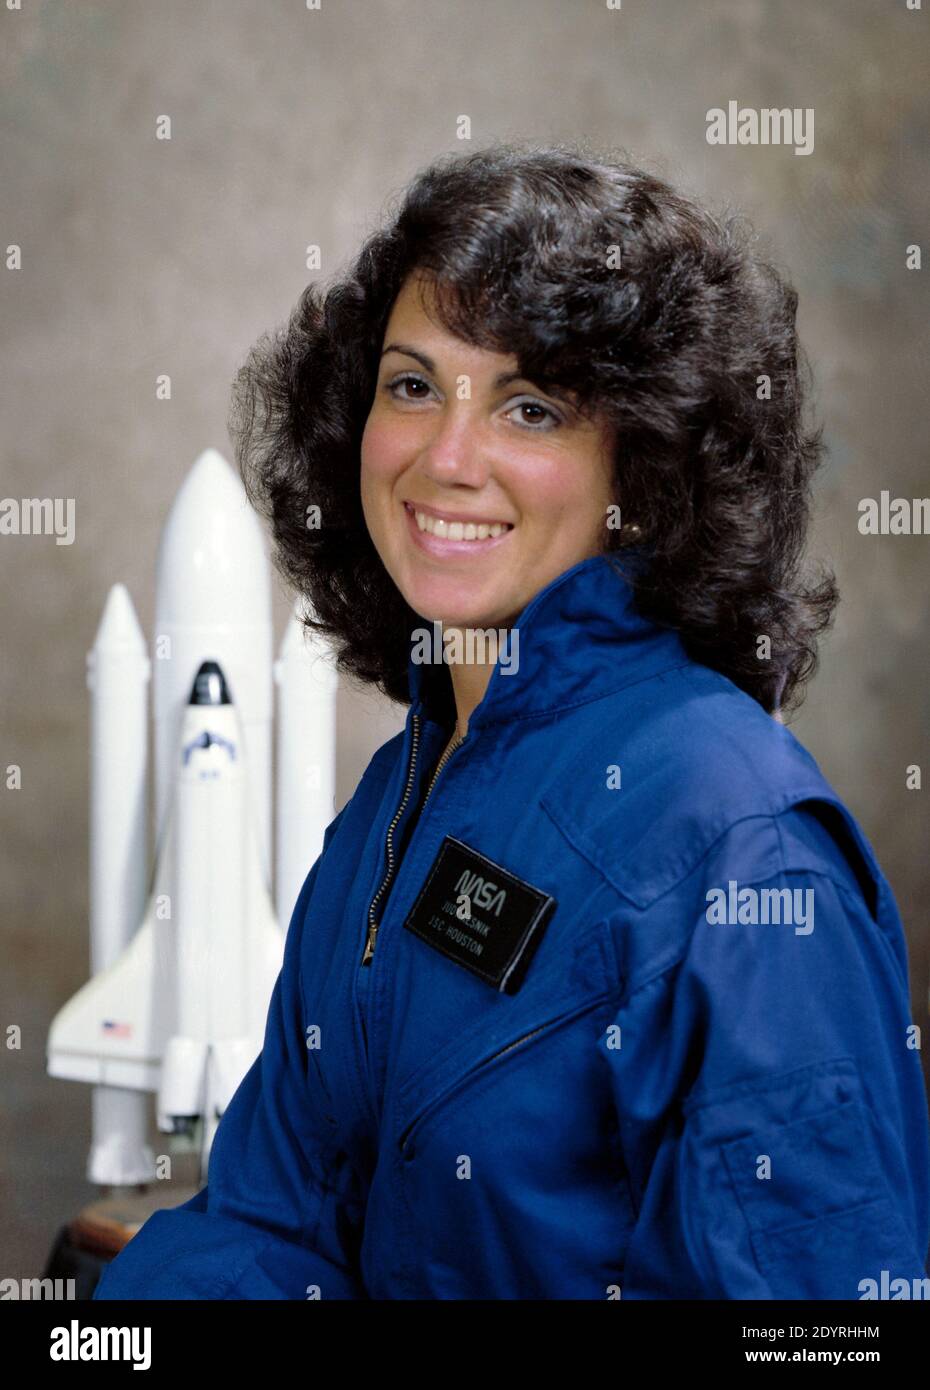 Judith Arlene Resnik (April 5, 1949 – January 28, 1986) American electrical engineer, software engineer, biomedical engineer, pilot and NASA astronaut who died aboard the Space Shuttle Challenger when it was destroyed during the launch of mission STS-51-L. Resnik was the second American woman in space and the fourth woman in space worldwide, logging 145 hours in orbit. She was the first Jewish woman of any nationality in space. The IEEE Judith Resnik Award for space engineering is named in her honor. Stock Photo